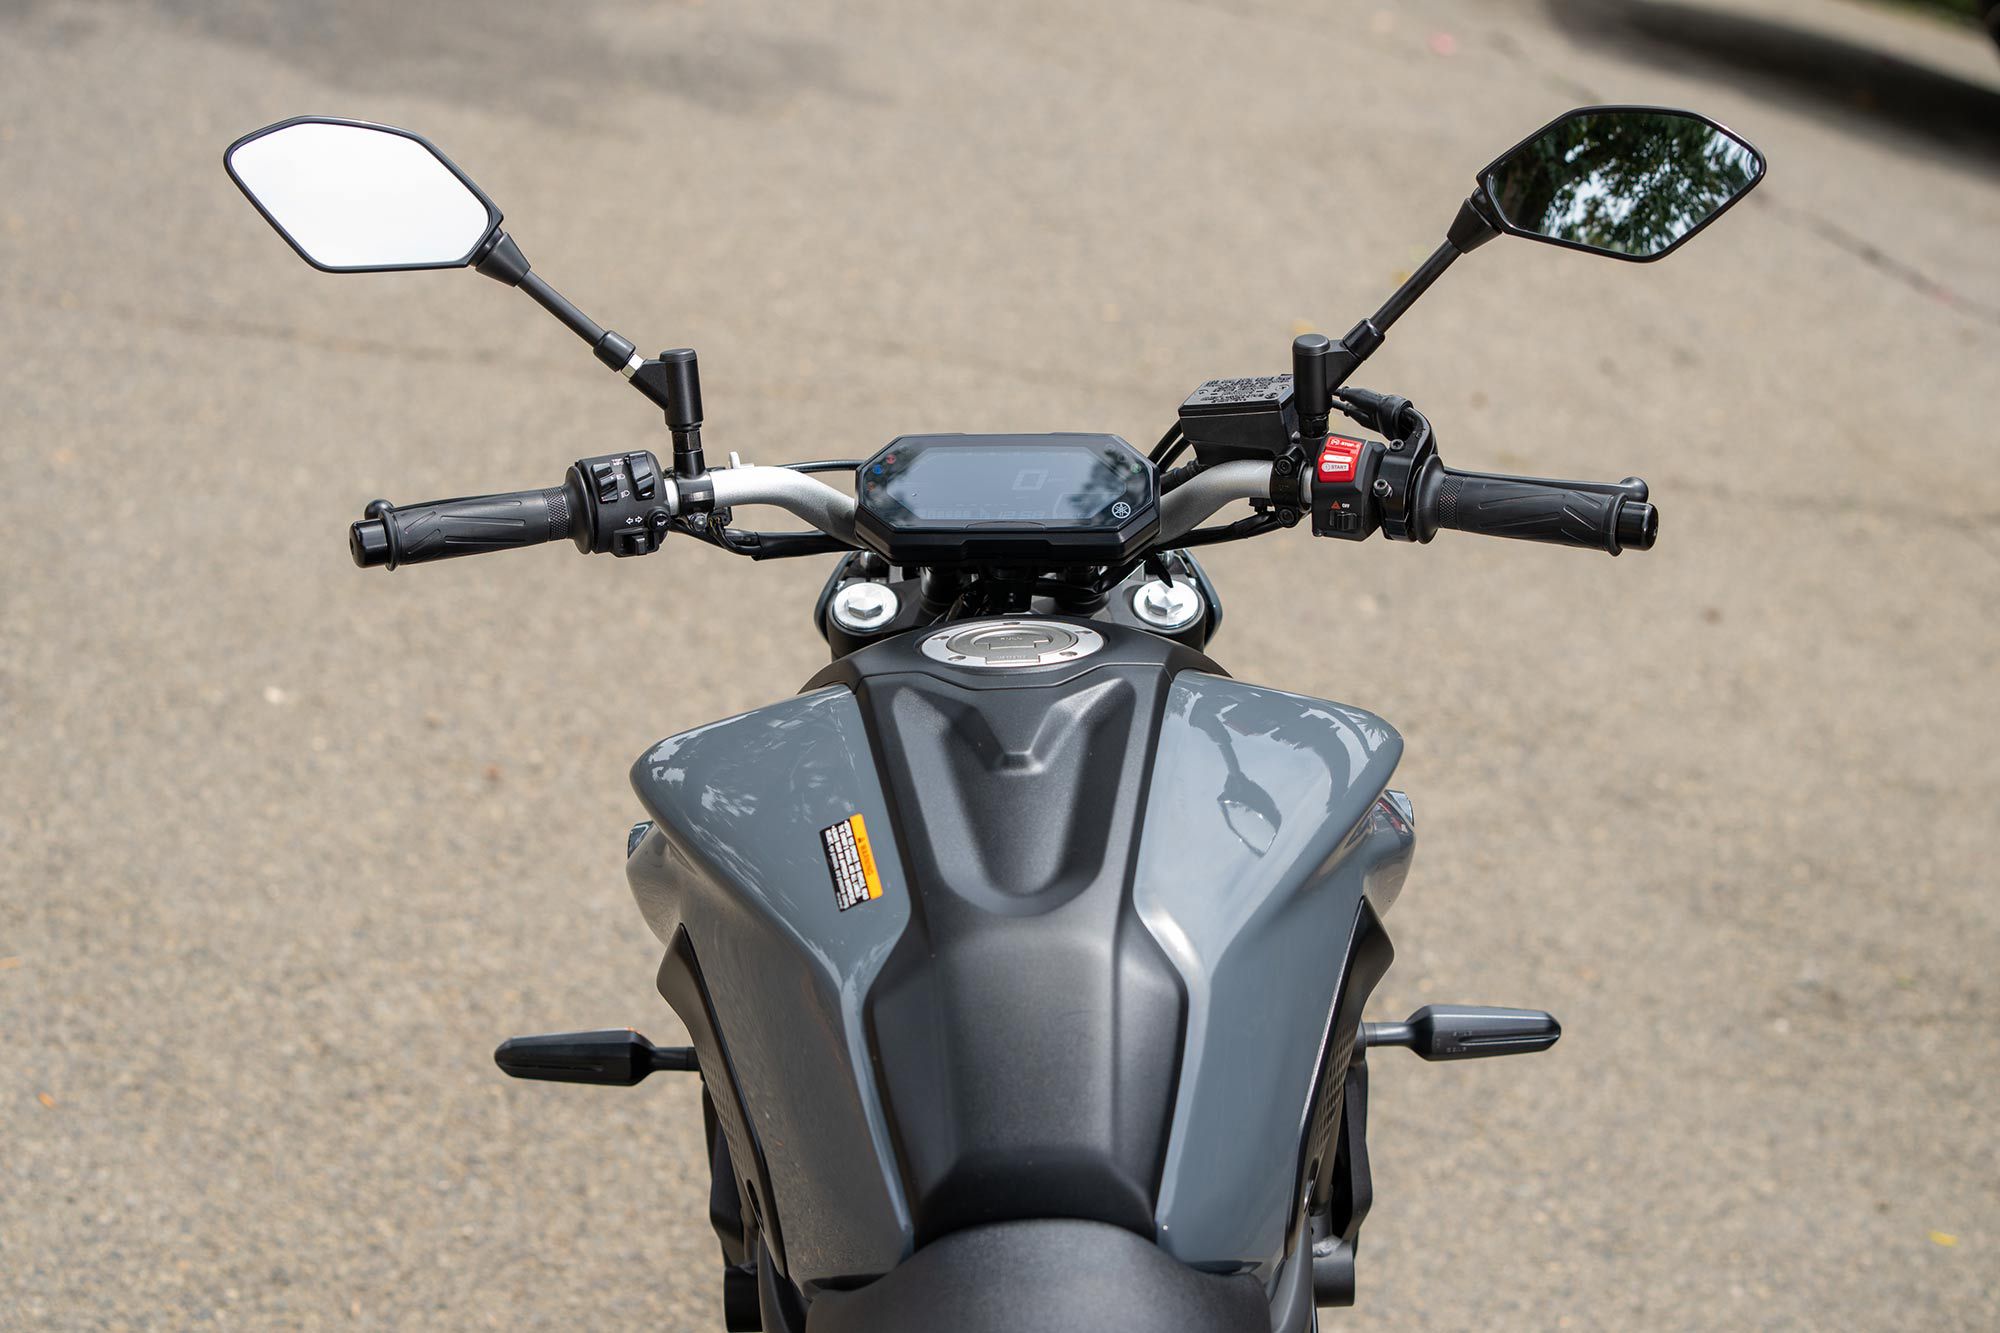 The MT-07’s cockpit is more tall rider friendly with its taller and wider handlebar.